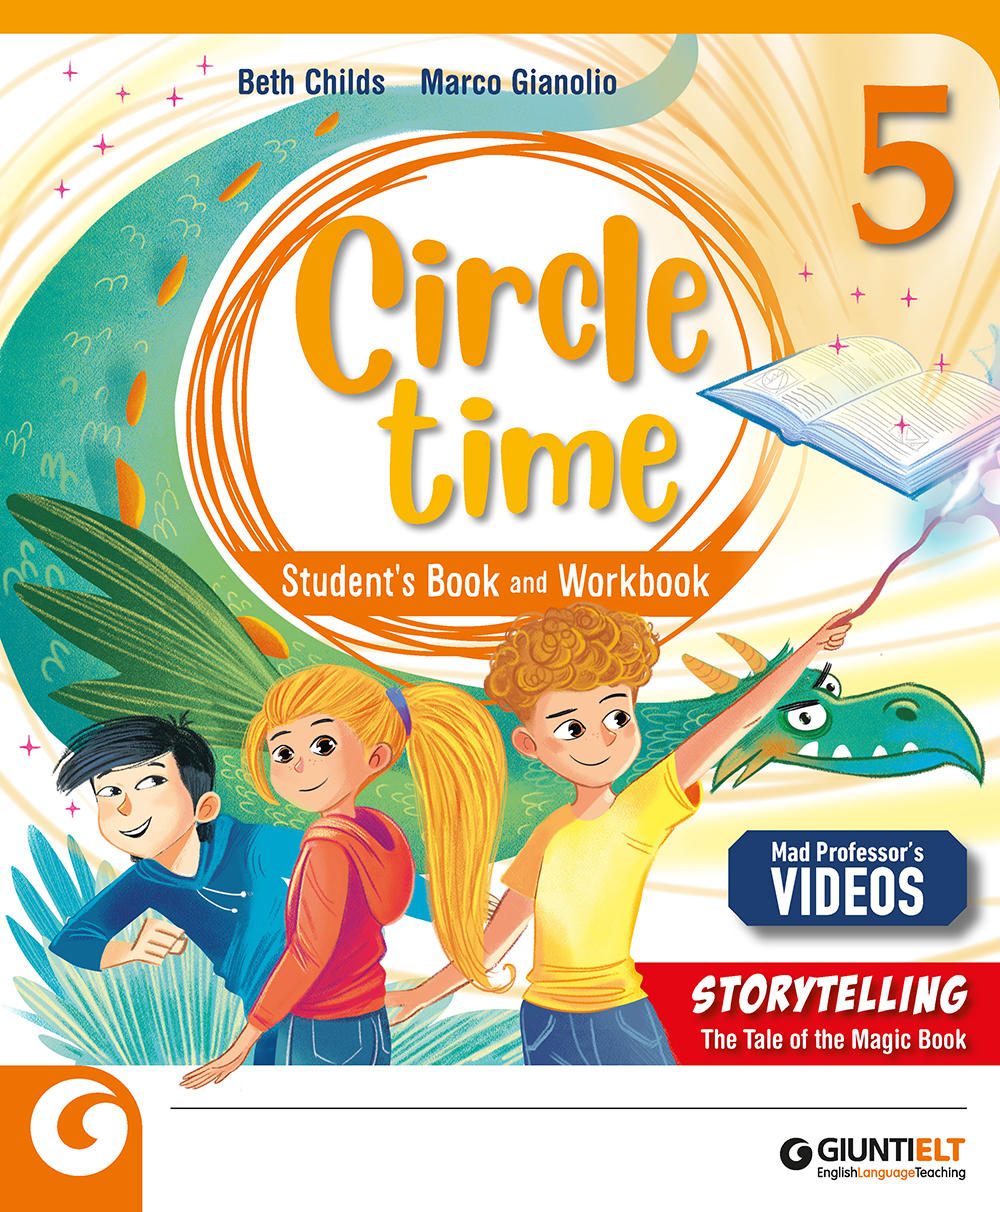 Circle Time - Student's Book and Workbook 5 | Giunti Scuola